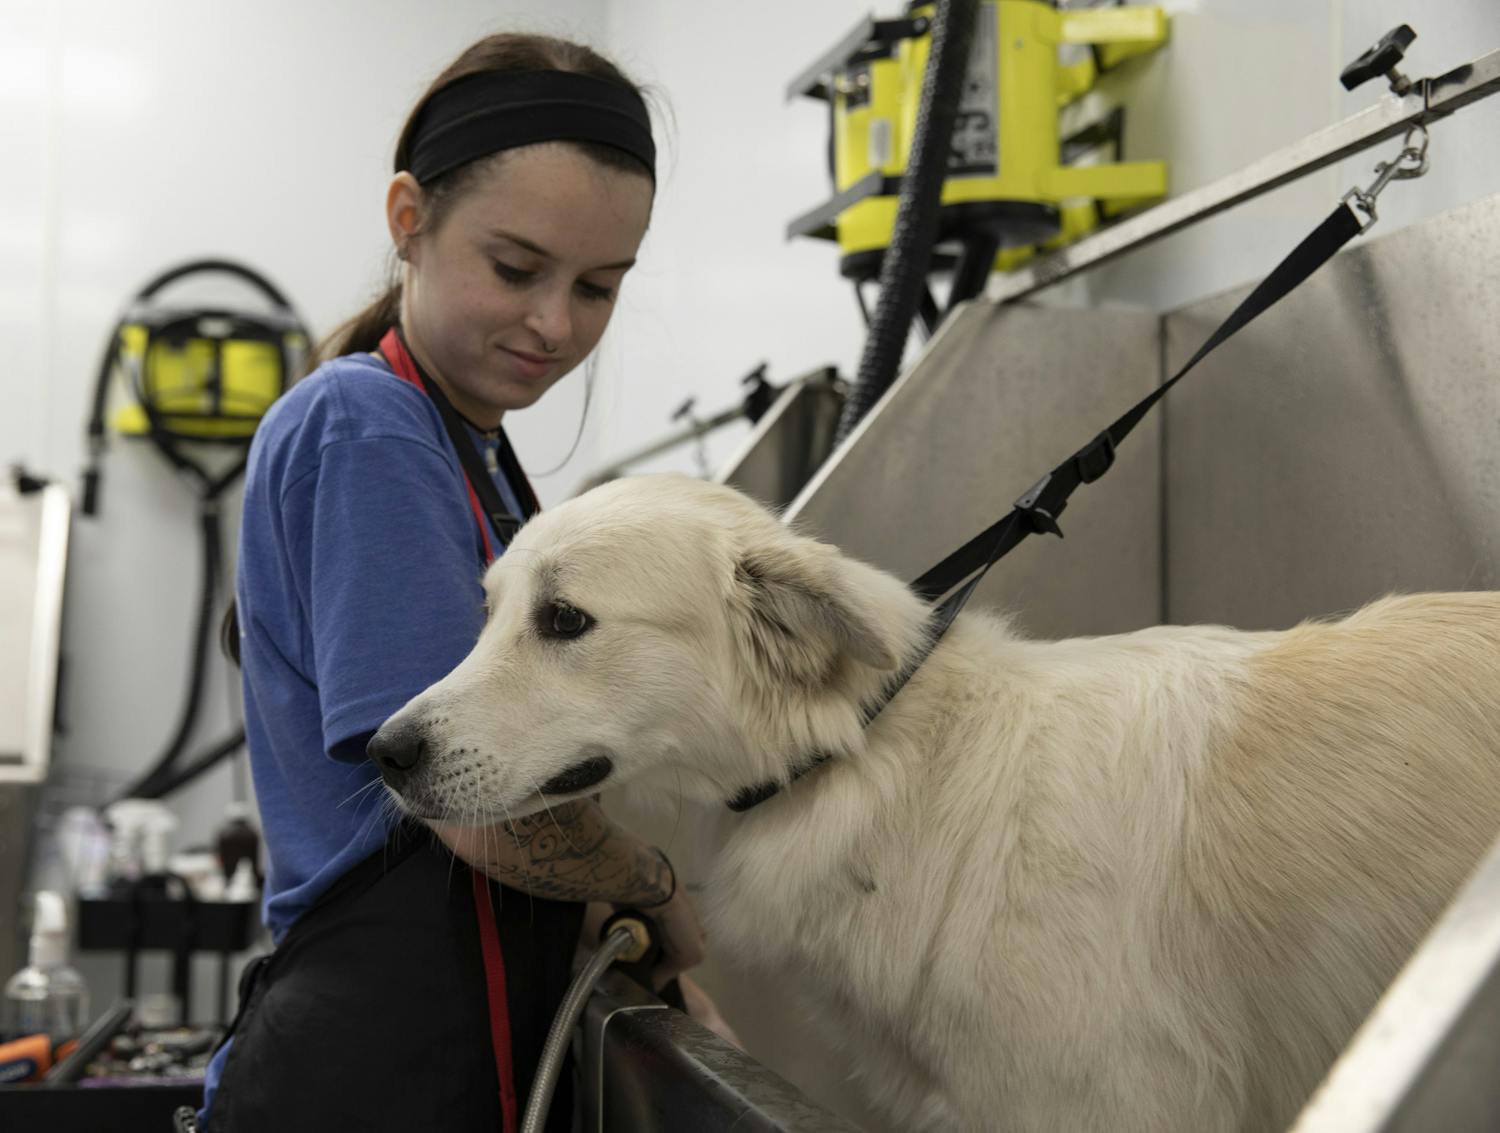 Sarah Headley, a pet groomer at Scenthound, sprays water on Daisy, the dog, on Tuesday, May 25, 2021.